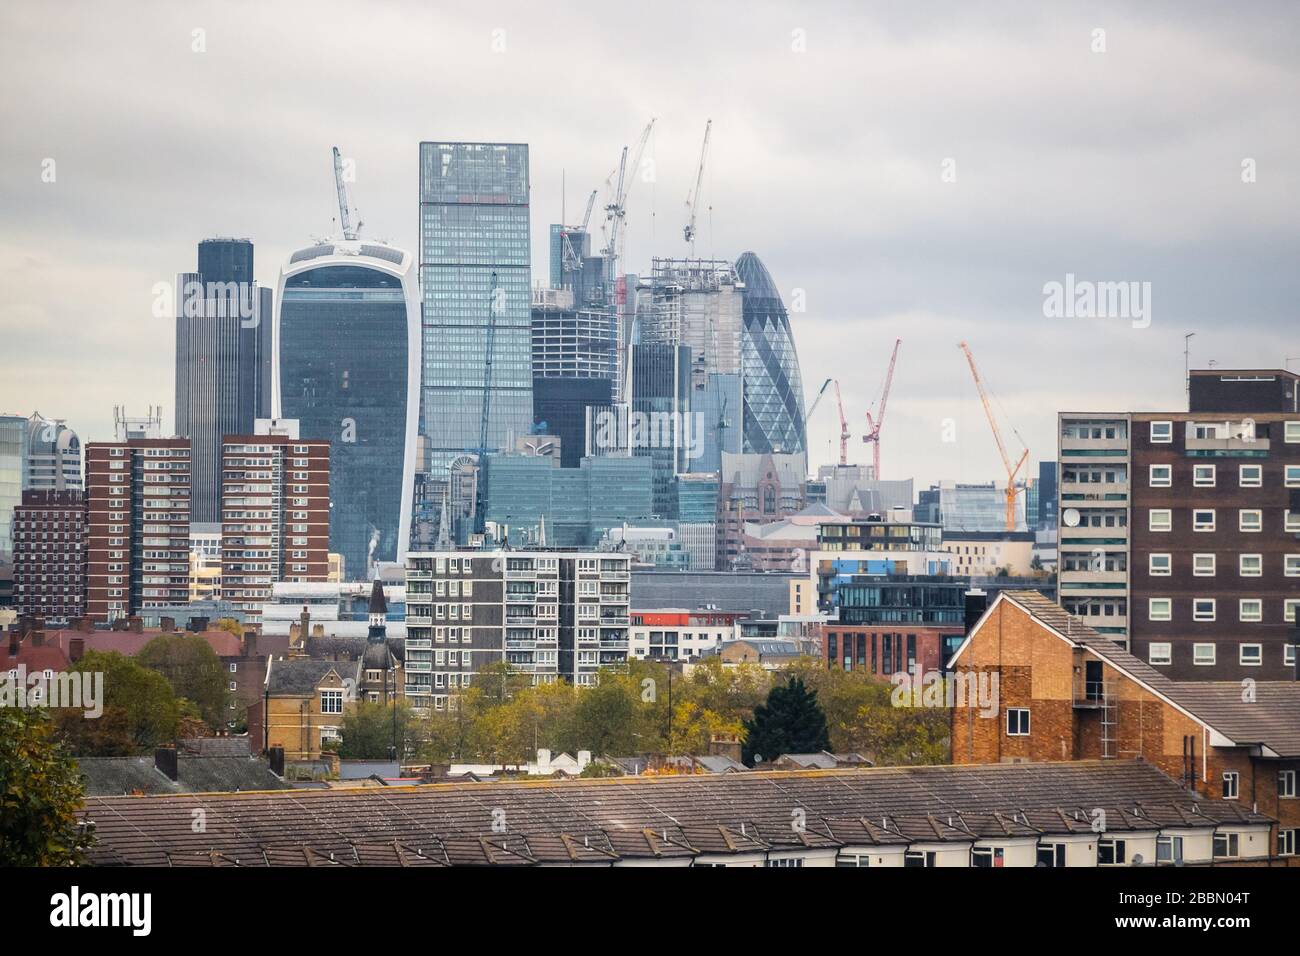 London cityscape with landmarks in an overcast day Stock Photo